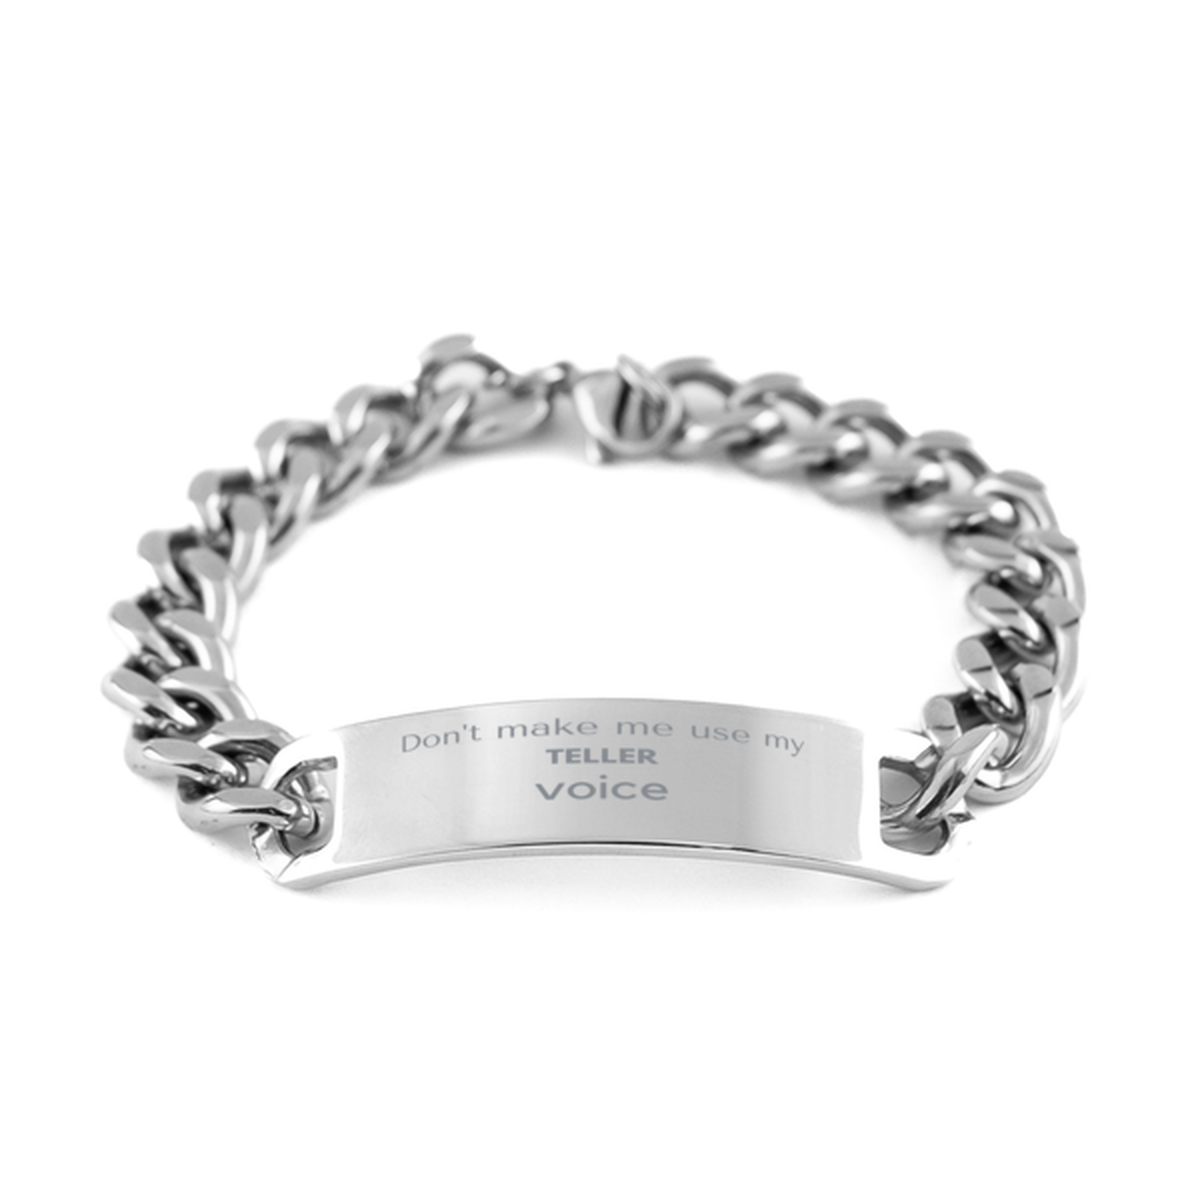 Don't make me use my Teller voice, Sarcasm Teller Gifts, Christmas Teller Cuban Chain Stainless Steel Bracelet Birthday Unique Gifts For Teller Coworkers, Men, Women, Colleague, Friends